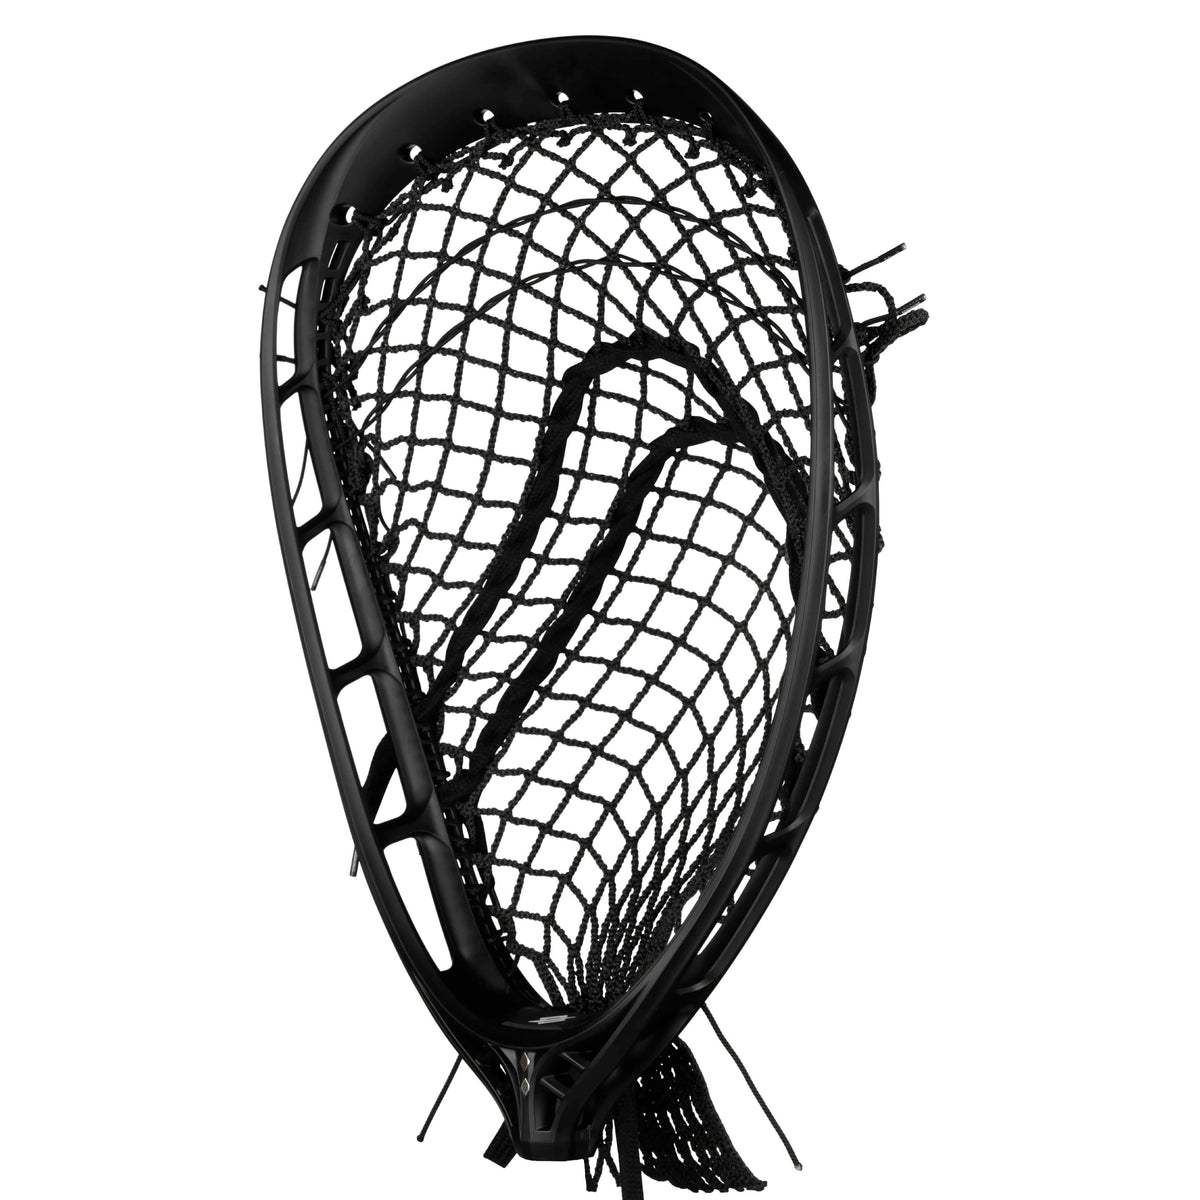 StringKing Mark 2G Goalie Strung Grizzly 2s Lacrosse Head